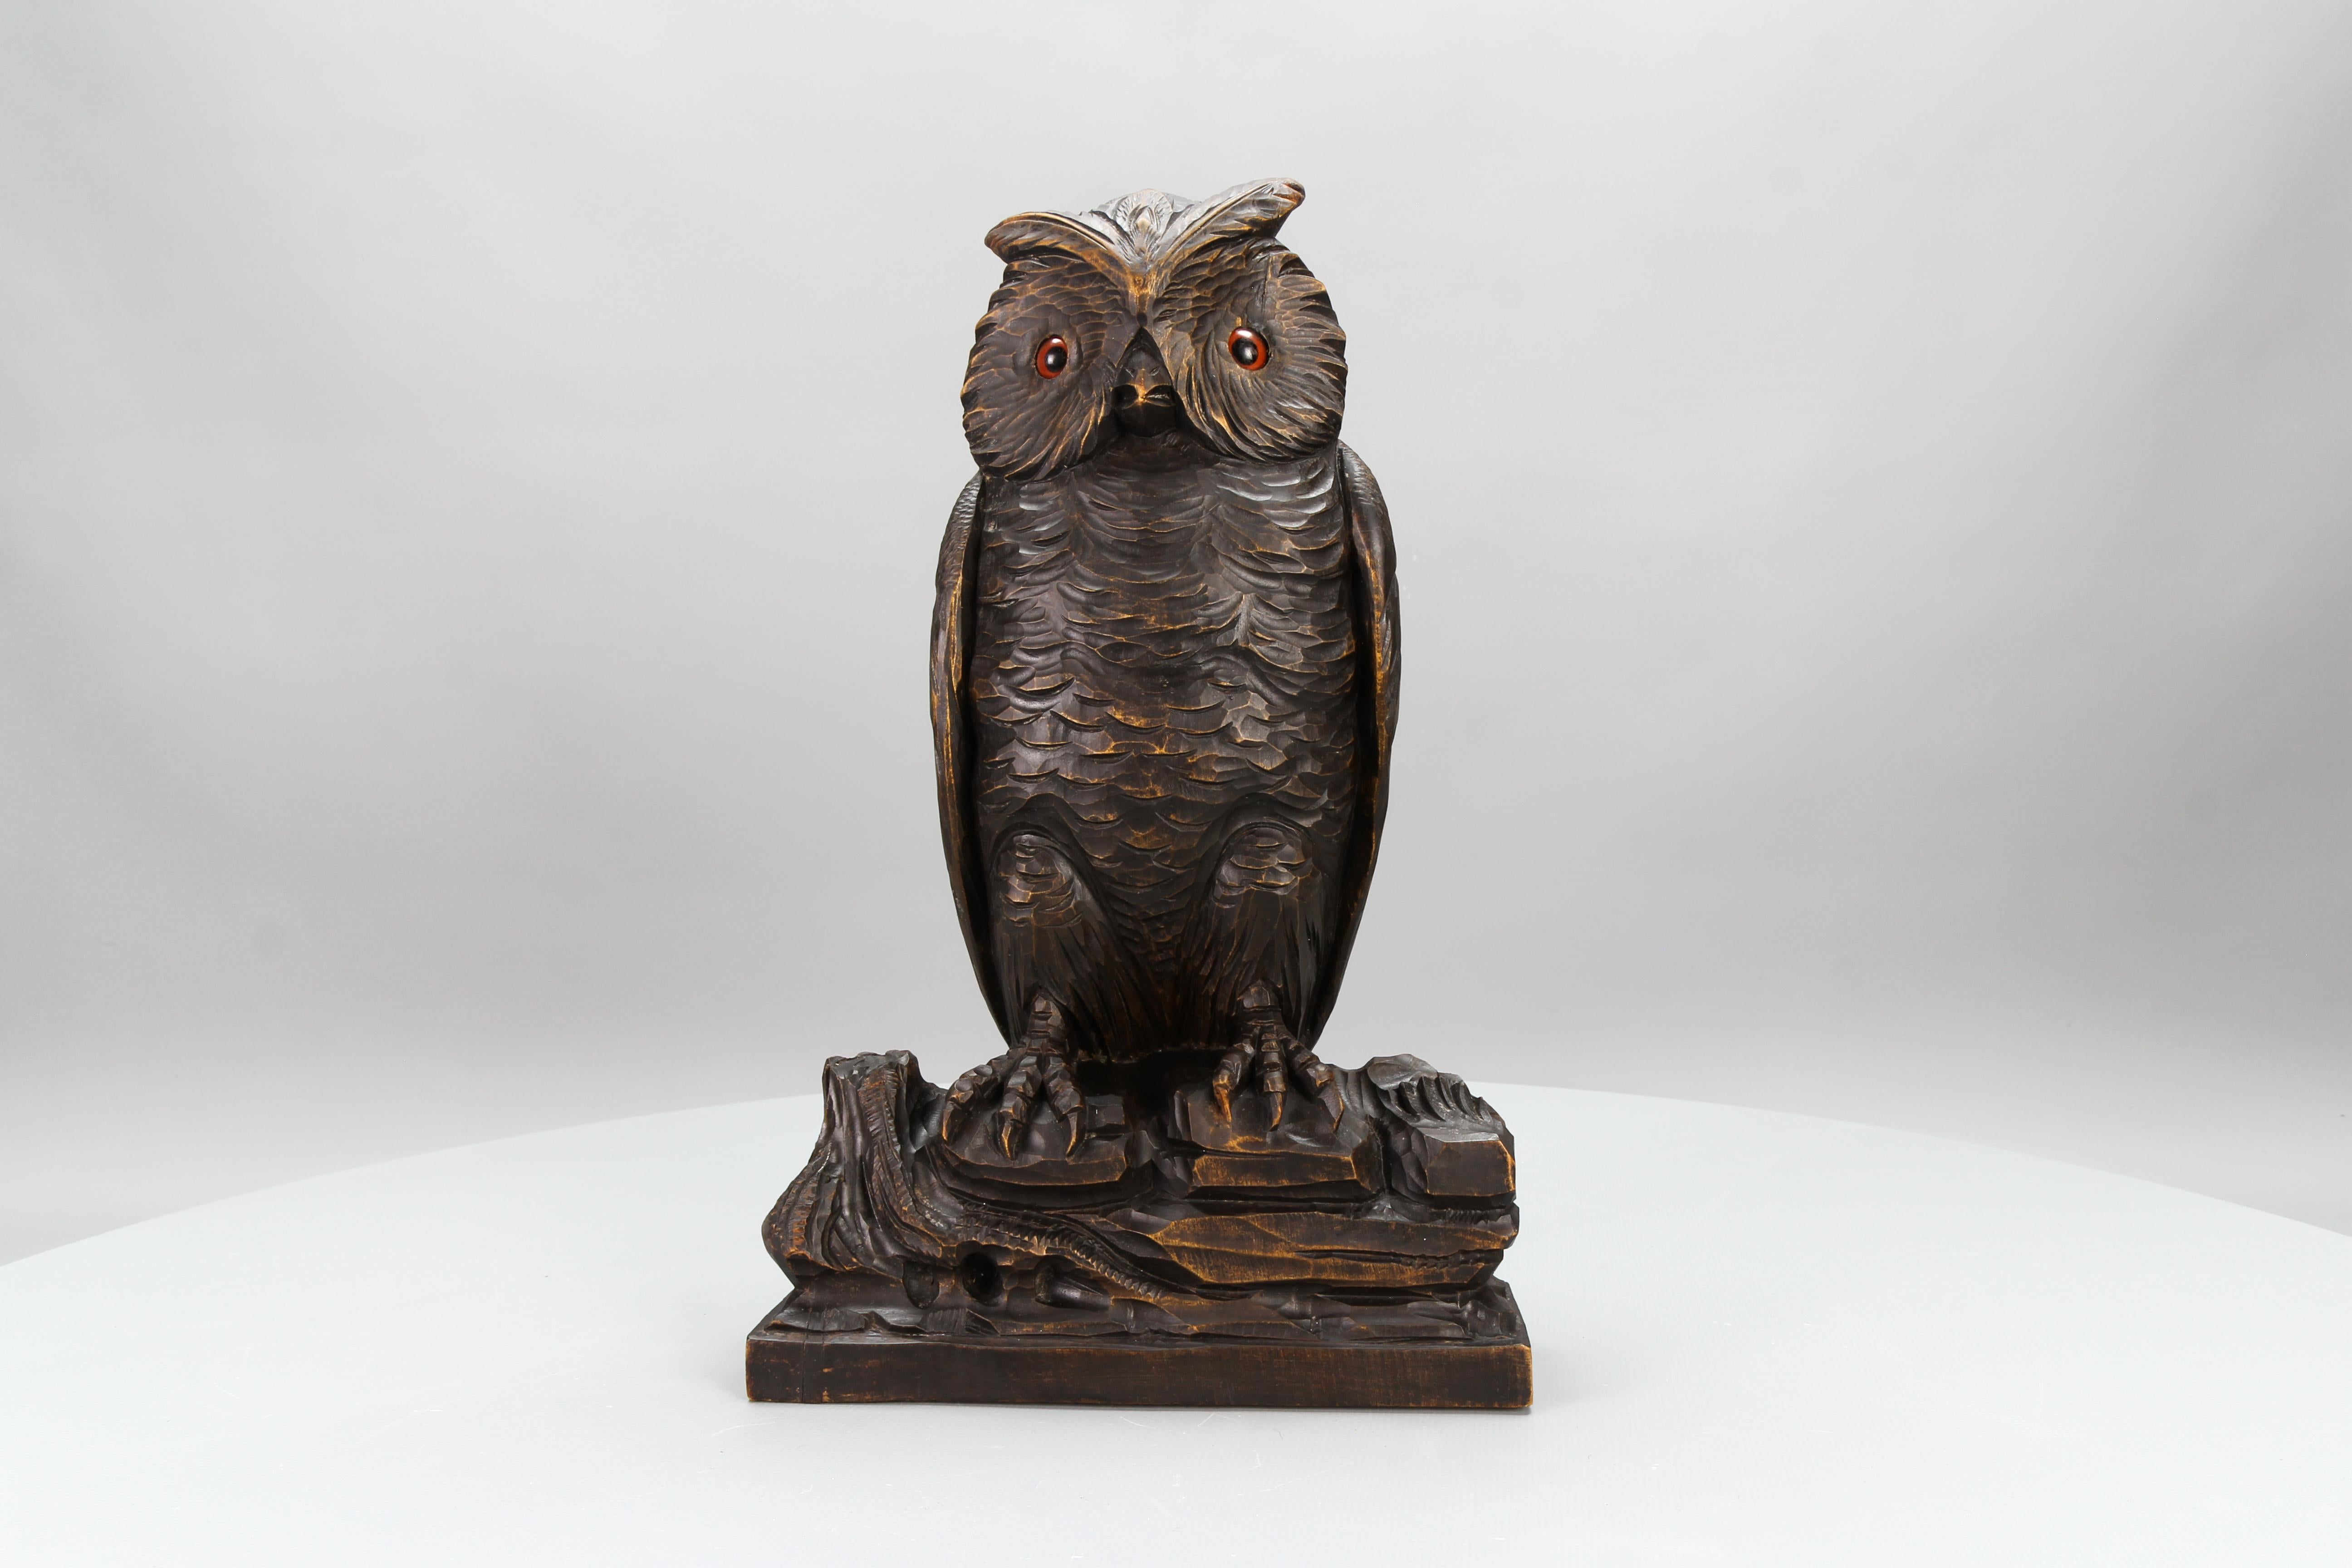 Antique German Black Forest Style Carved Owl Sculpture with Glass Eyes, ca. 1920 For Sale 7